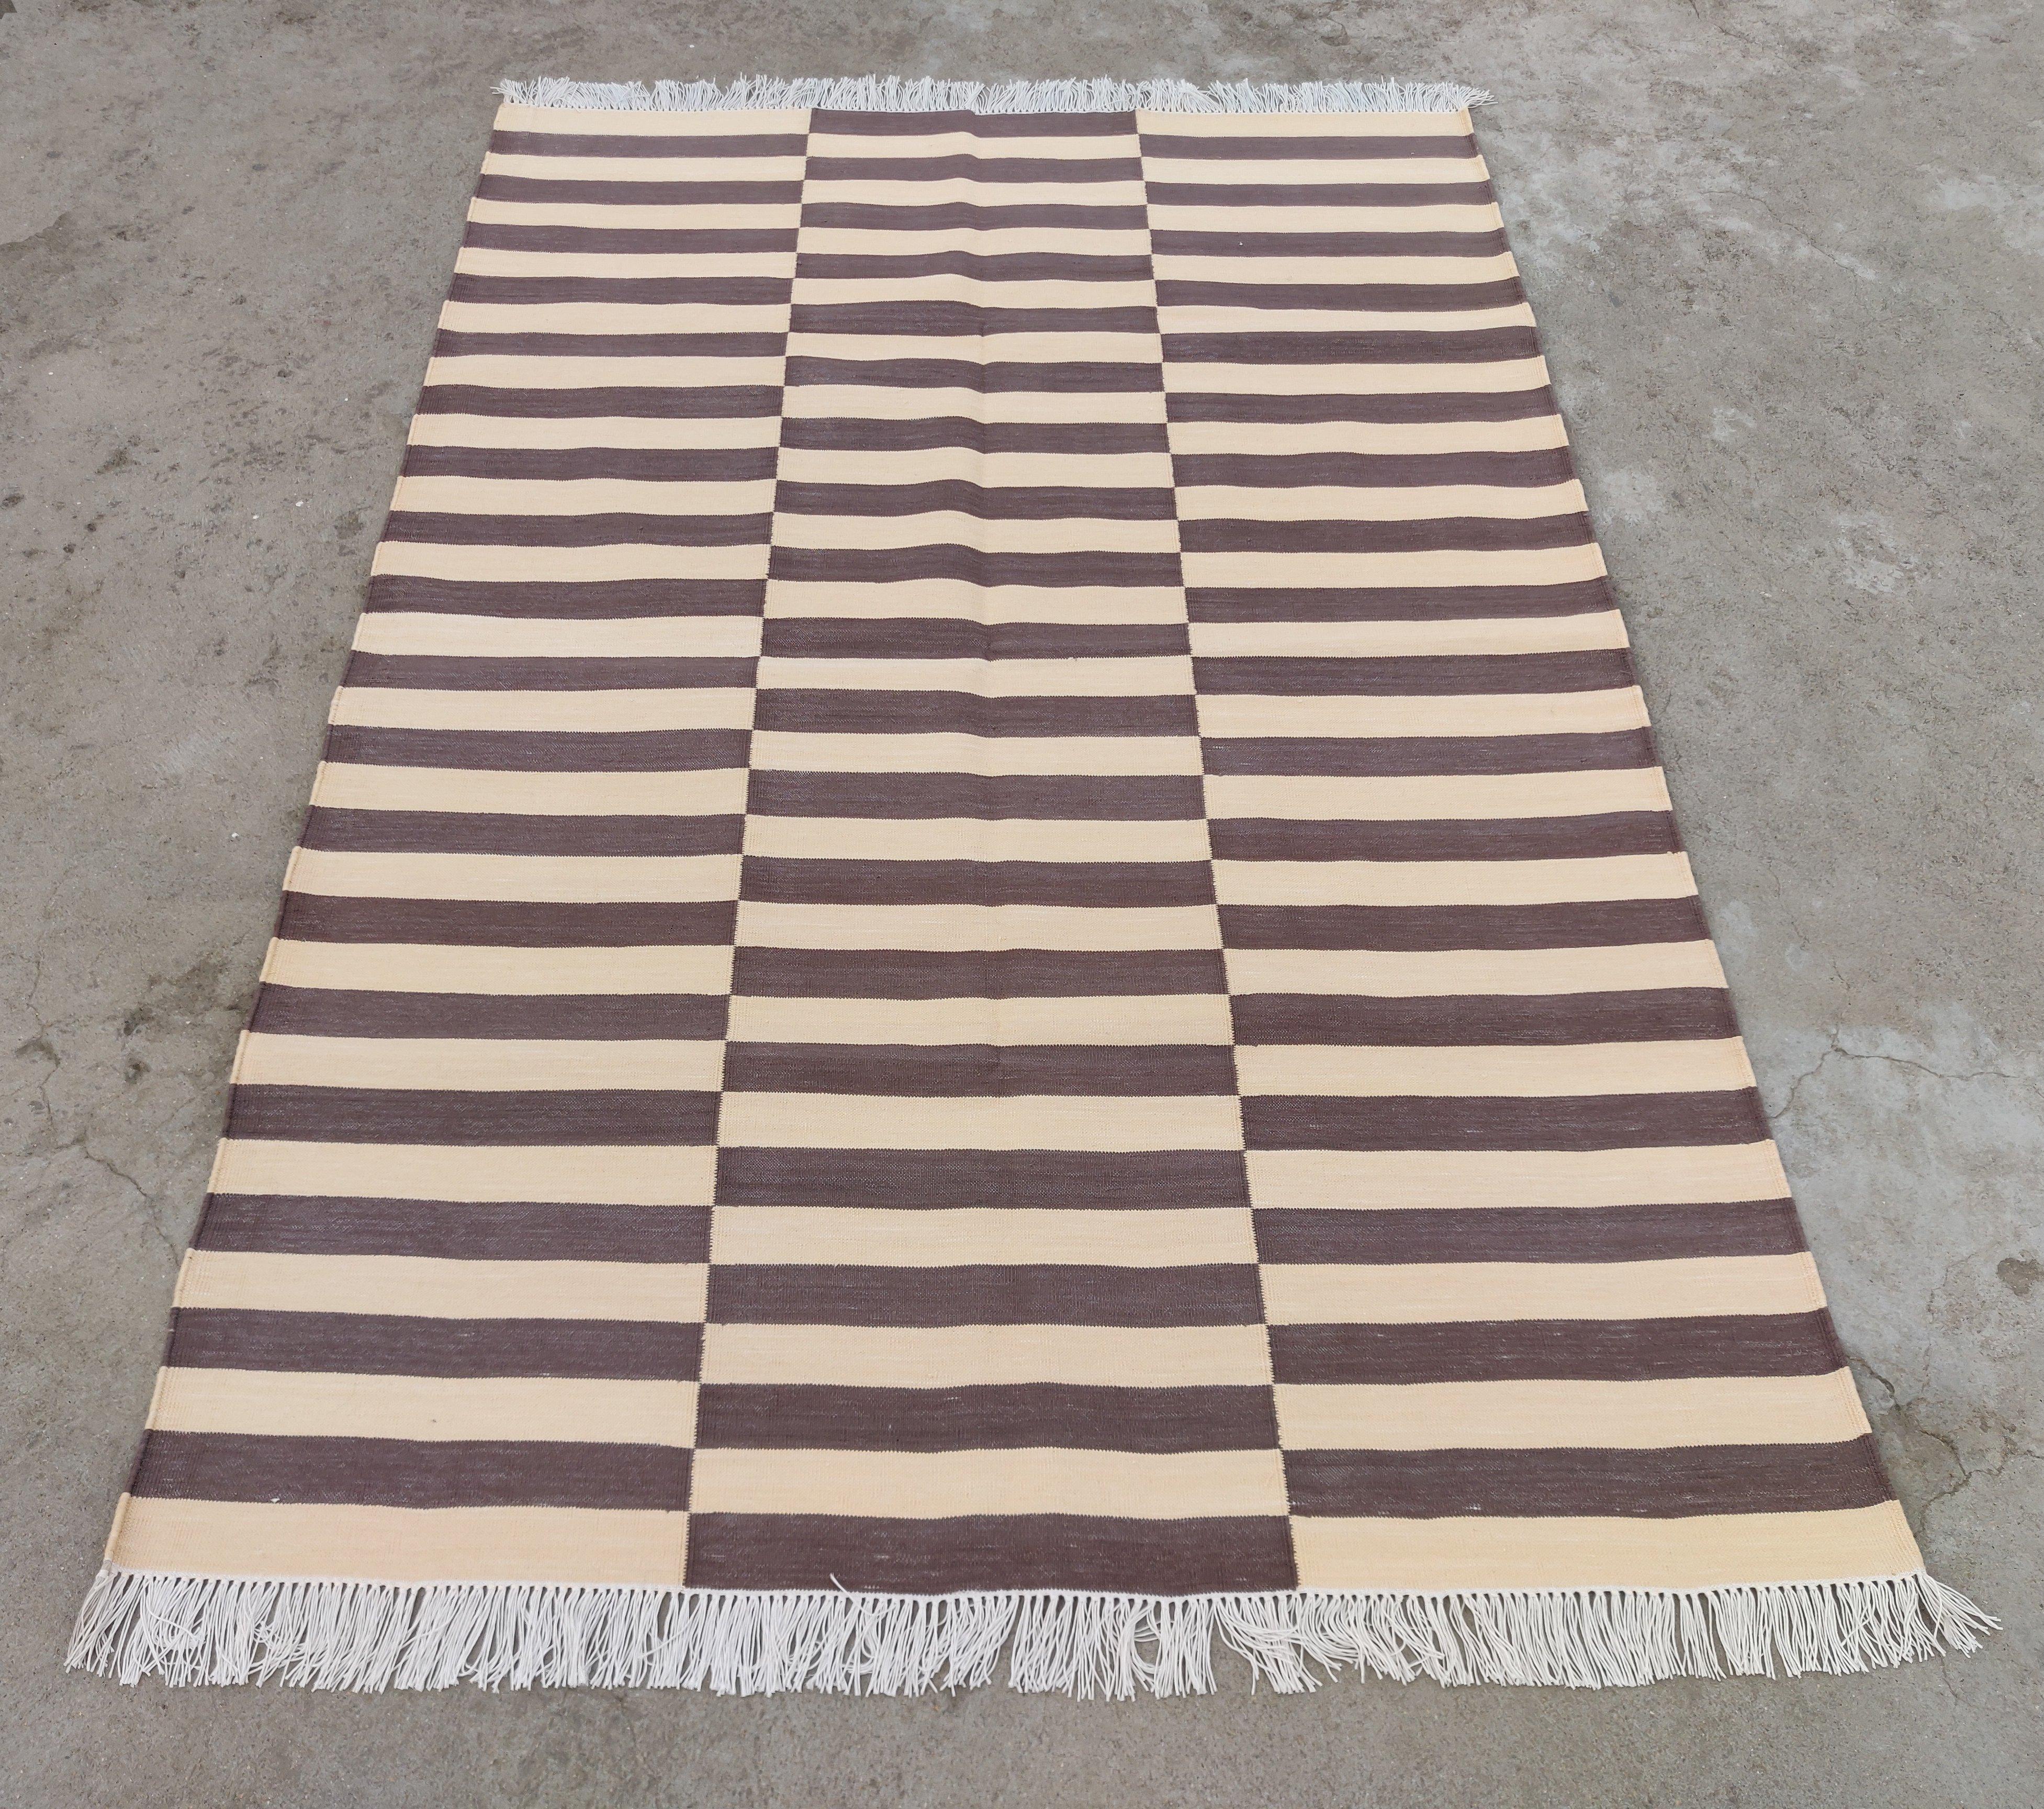 Handmade Cotton Area Flat Weave Rug, 4x6 Brown And Beige Striped Indian Dhurrie In New Condition For Sale In Jaipur, IN